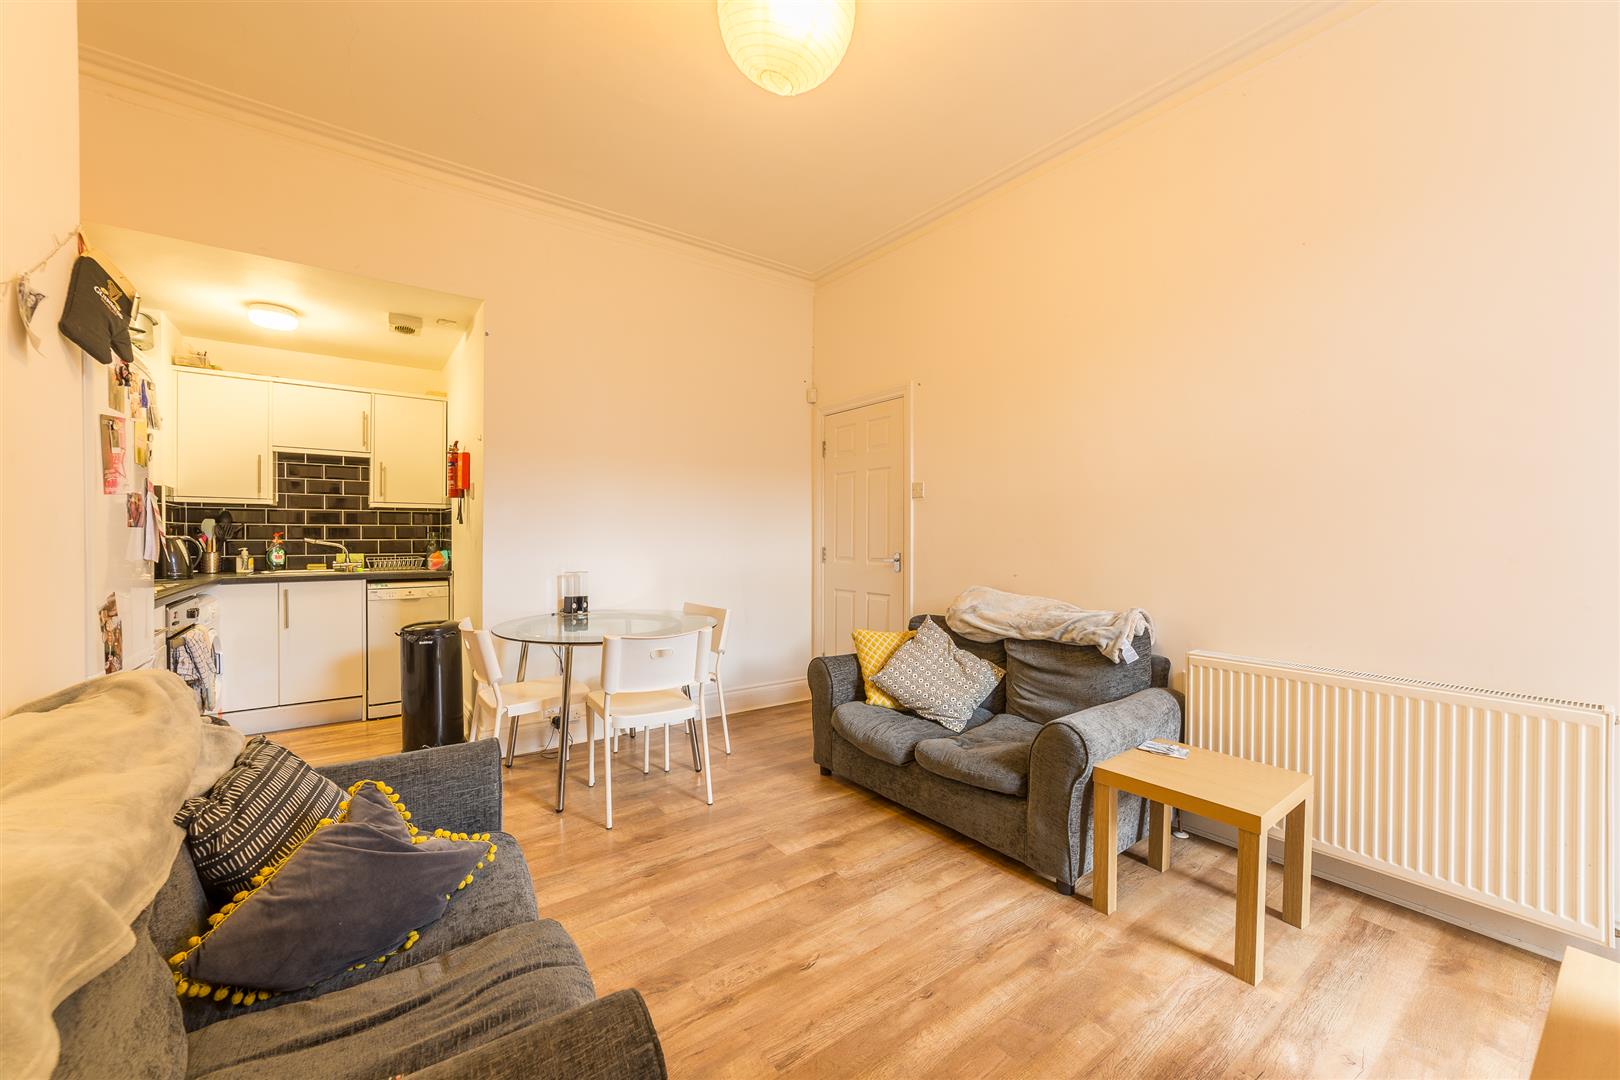 3 bed flat to rent in Helmsley Road, Sandyford - Property Image 1